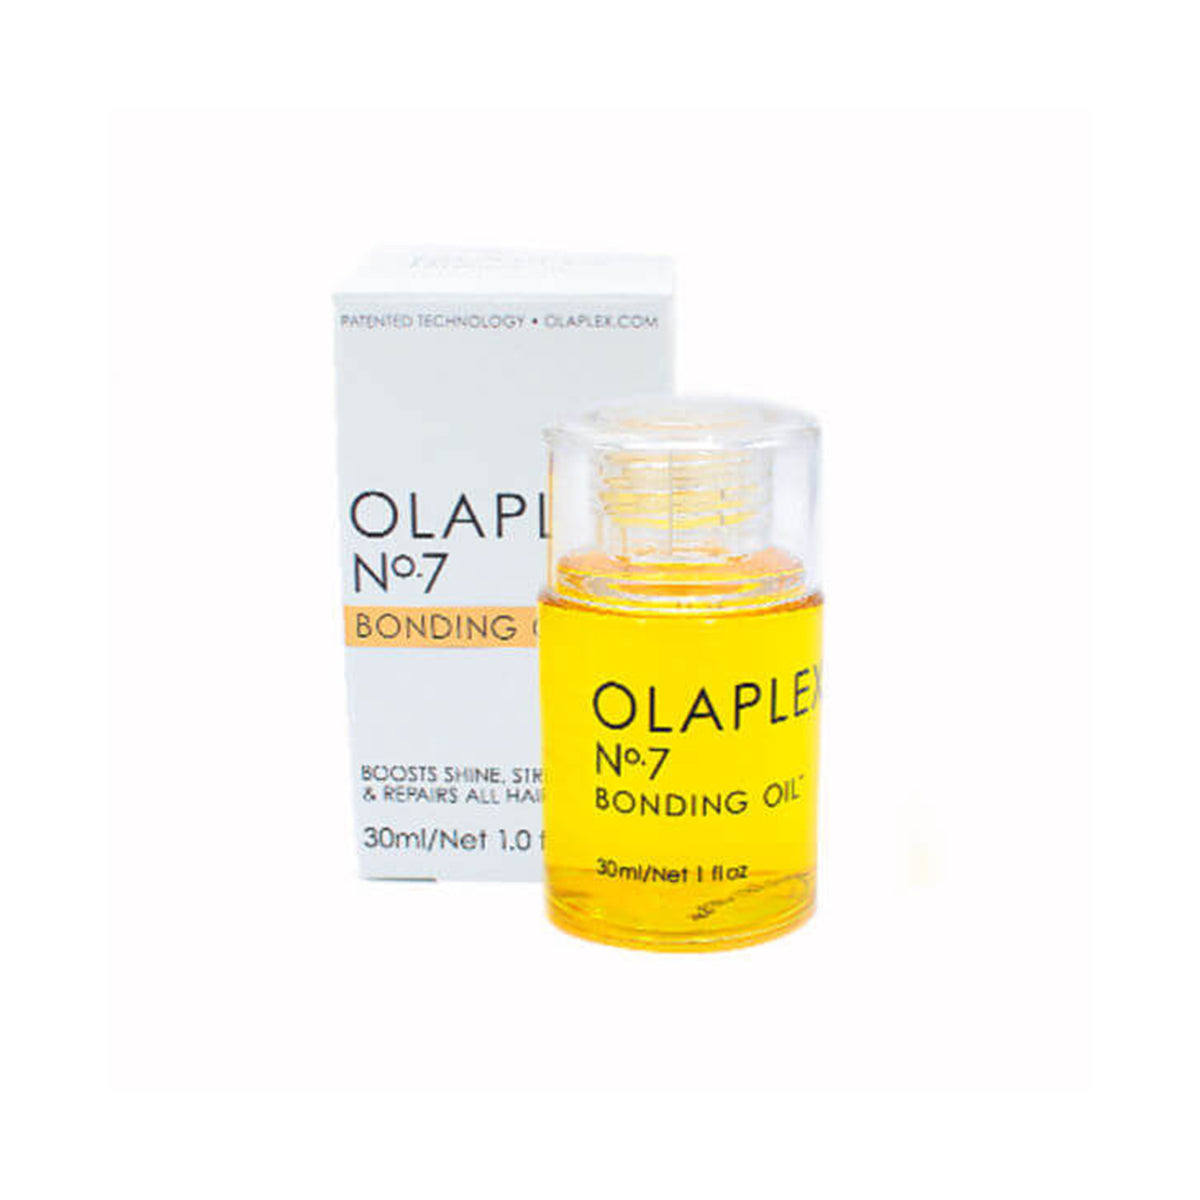 Olaplex|No.7 Bonding Oil 30ml |ADDS SHINE, STRENGTHENS AND HEAT PROTECTS